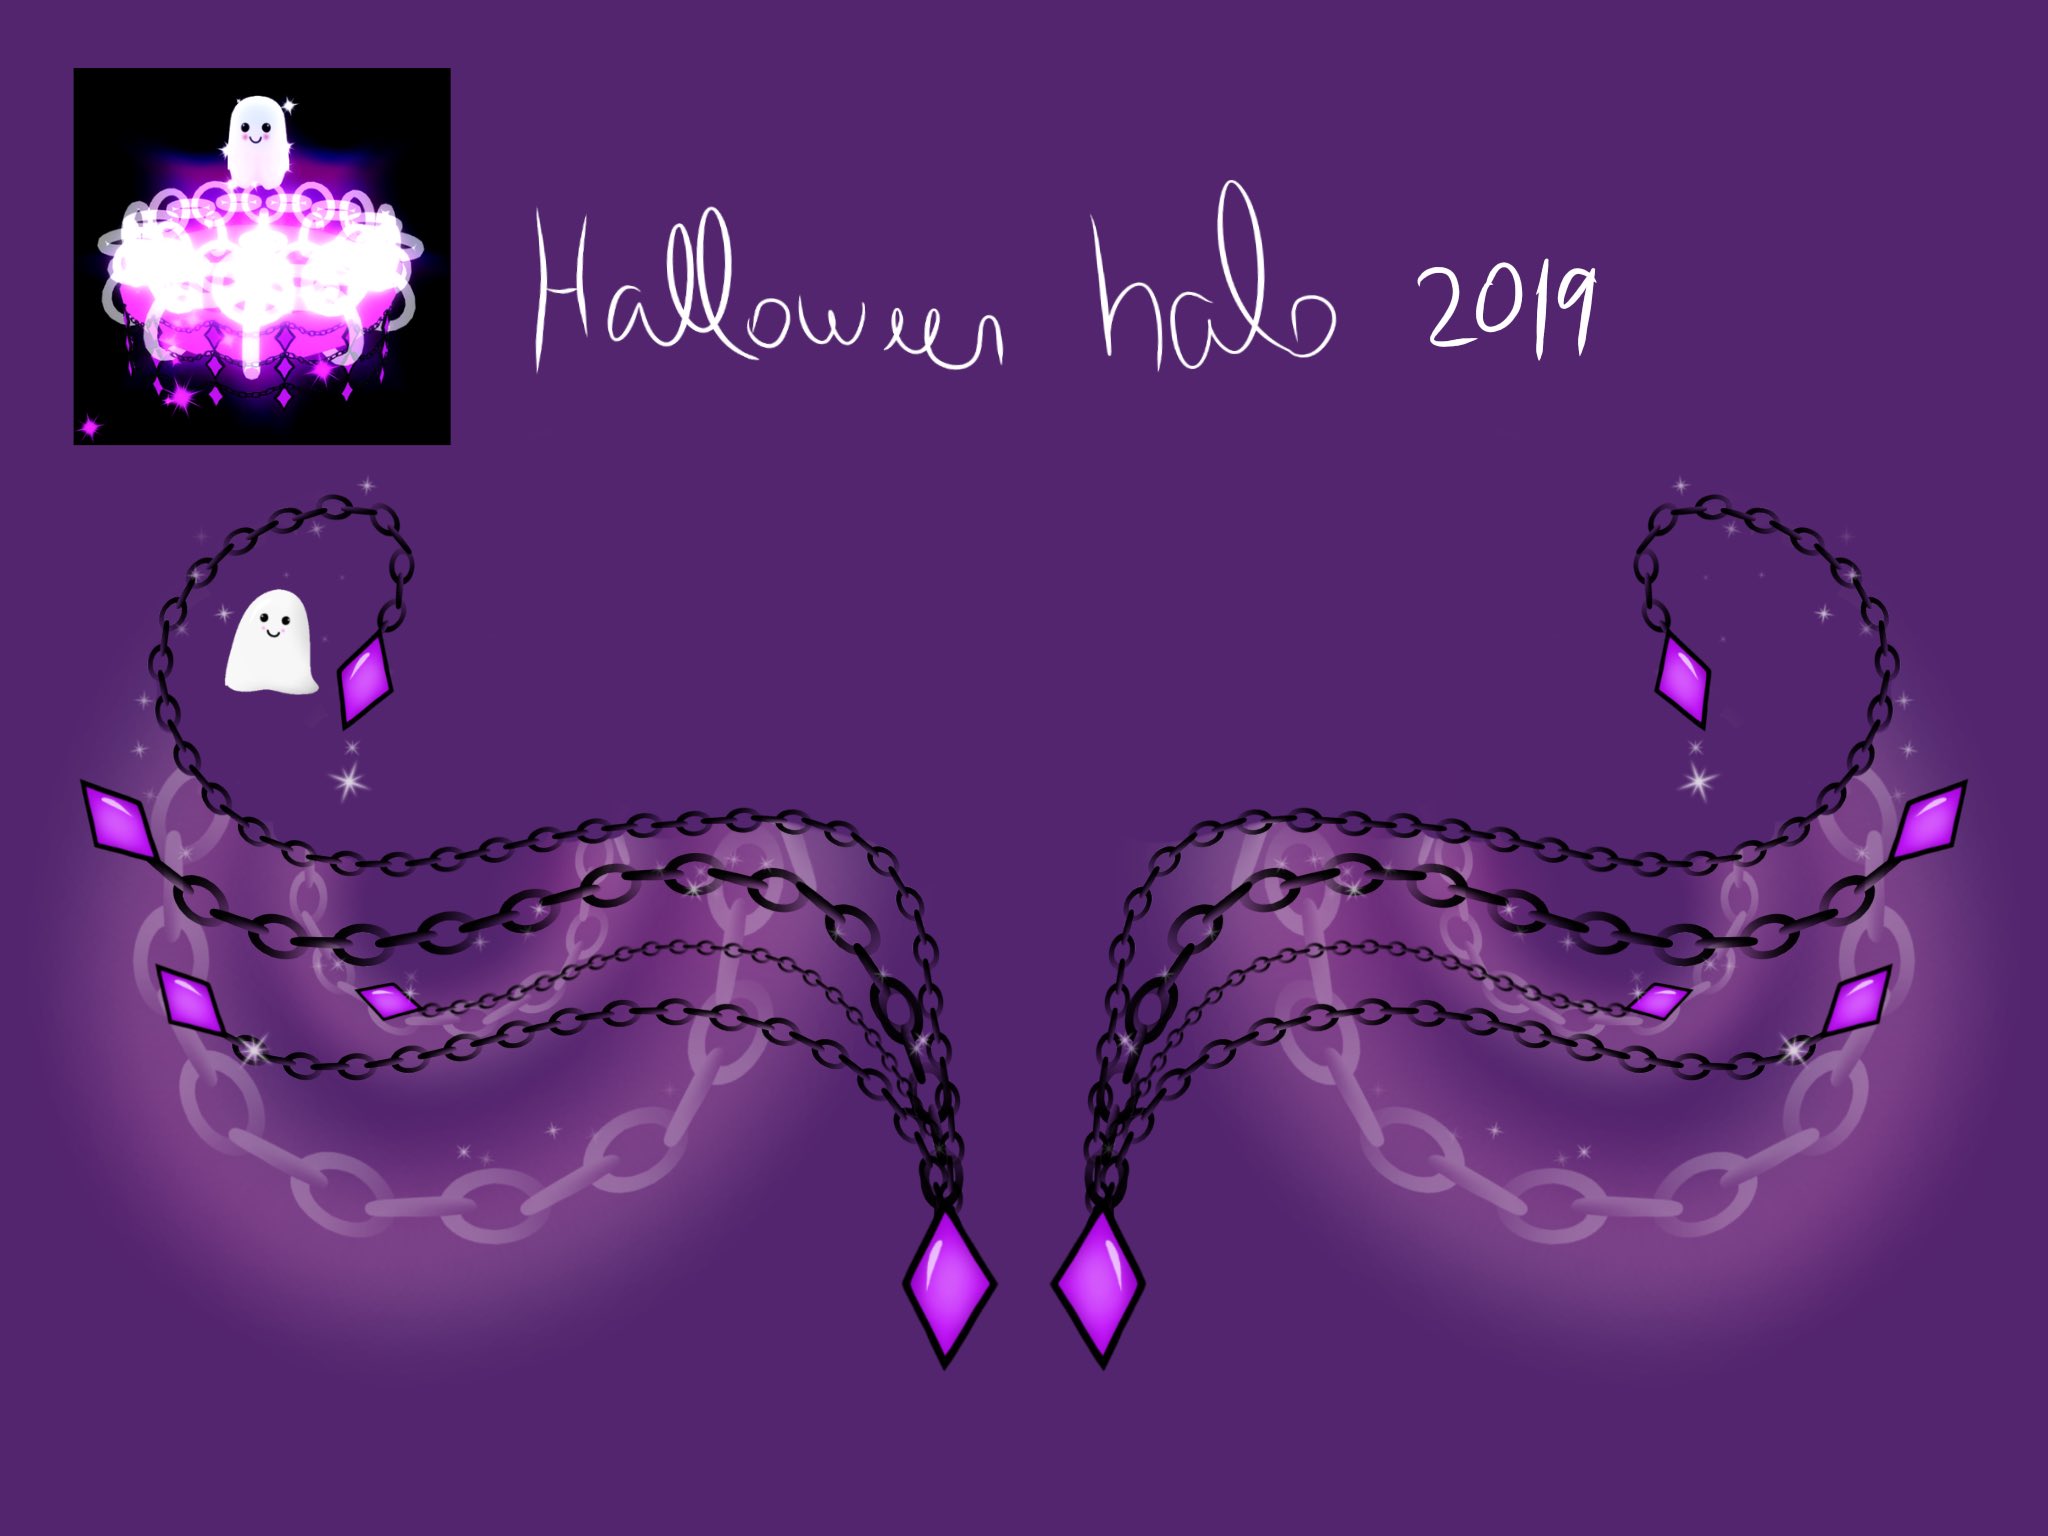 THESE SPOOKY HALLOWEEN HALO DESIGN CONCEPTS ARE INCREDIBLE